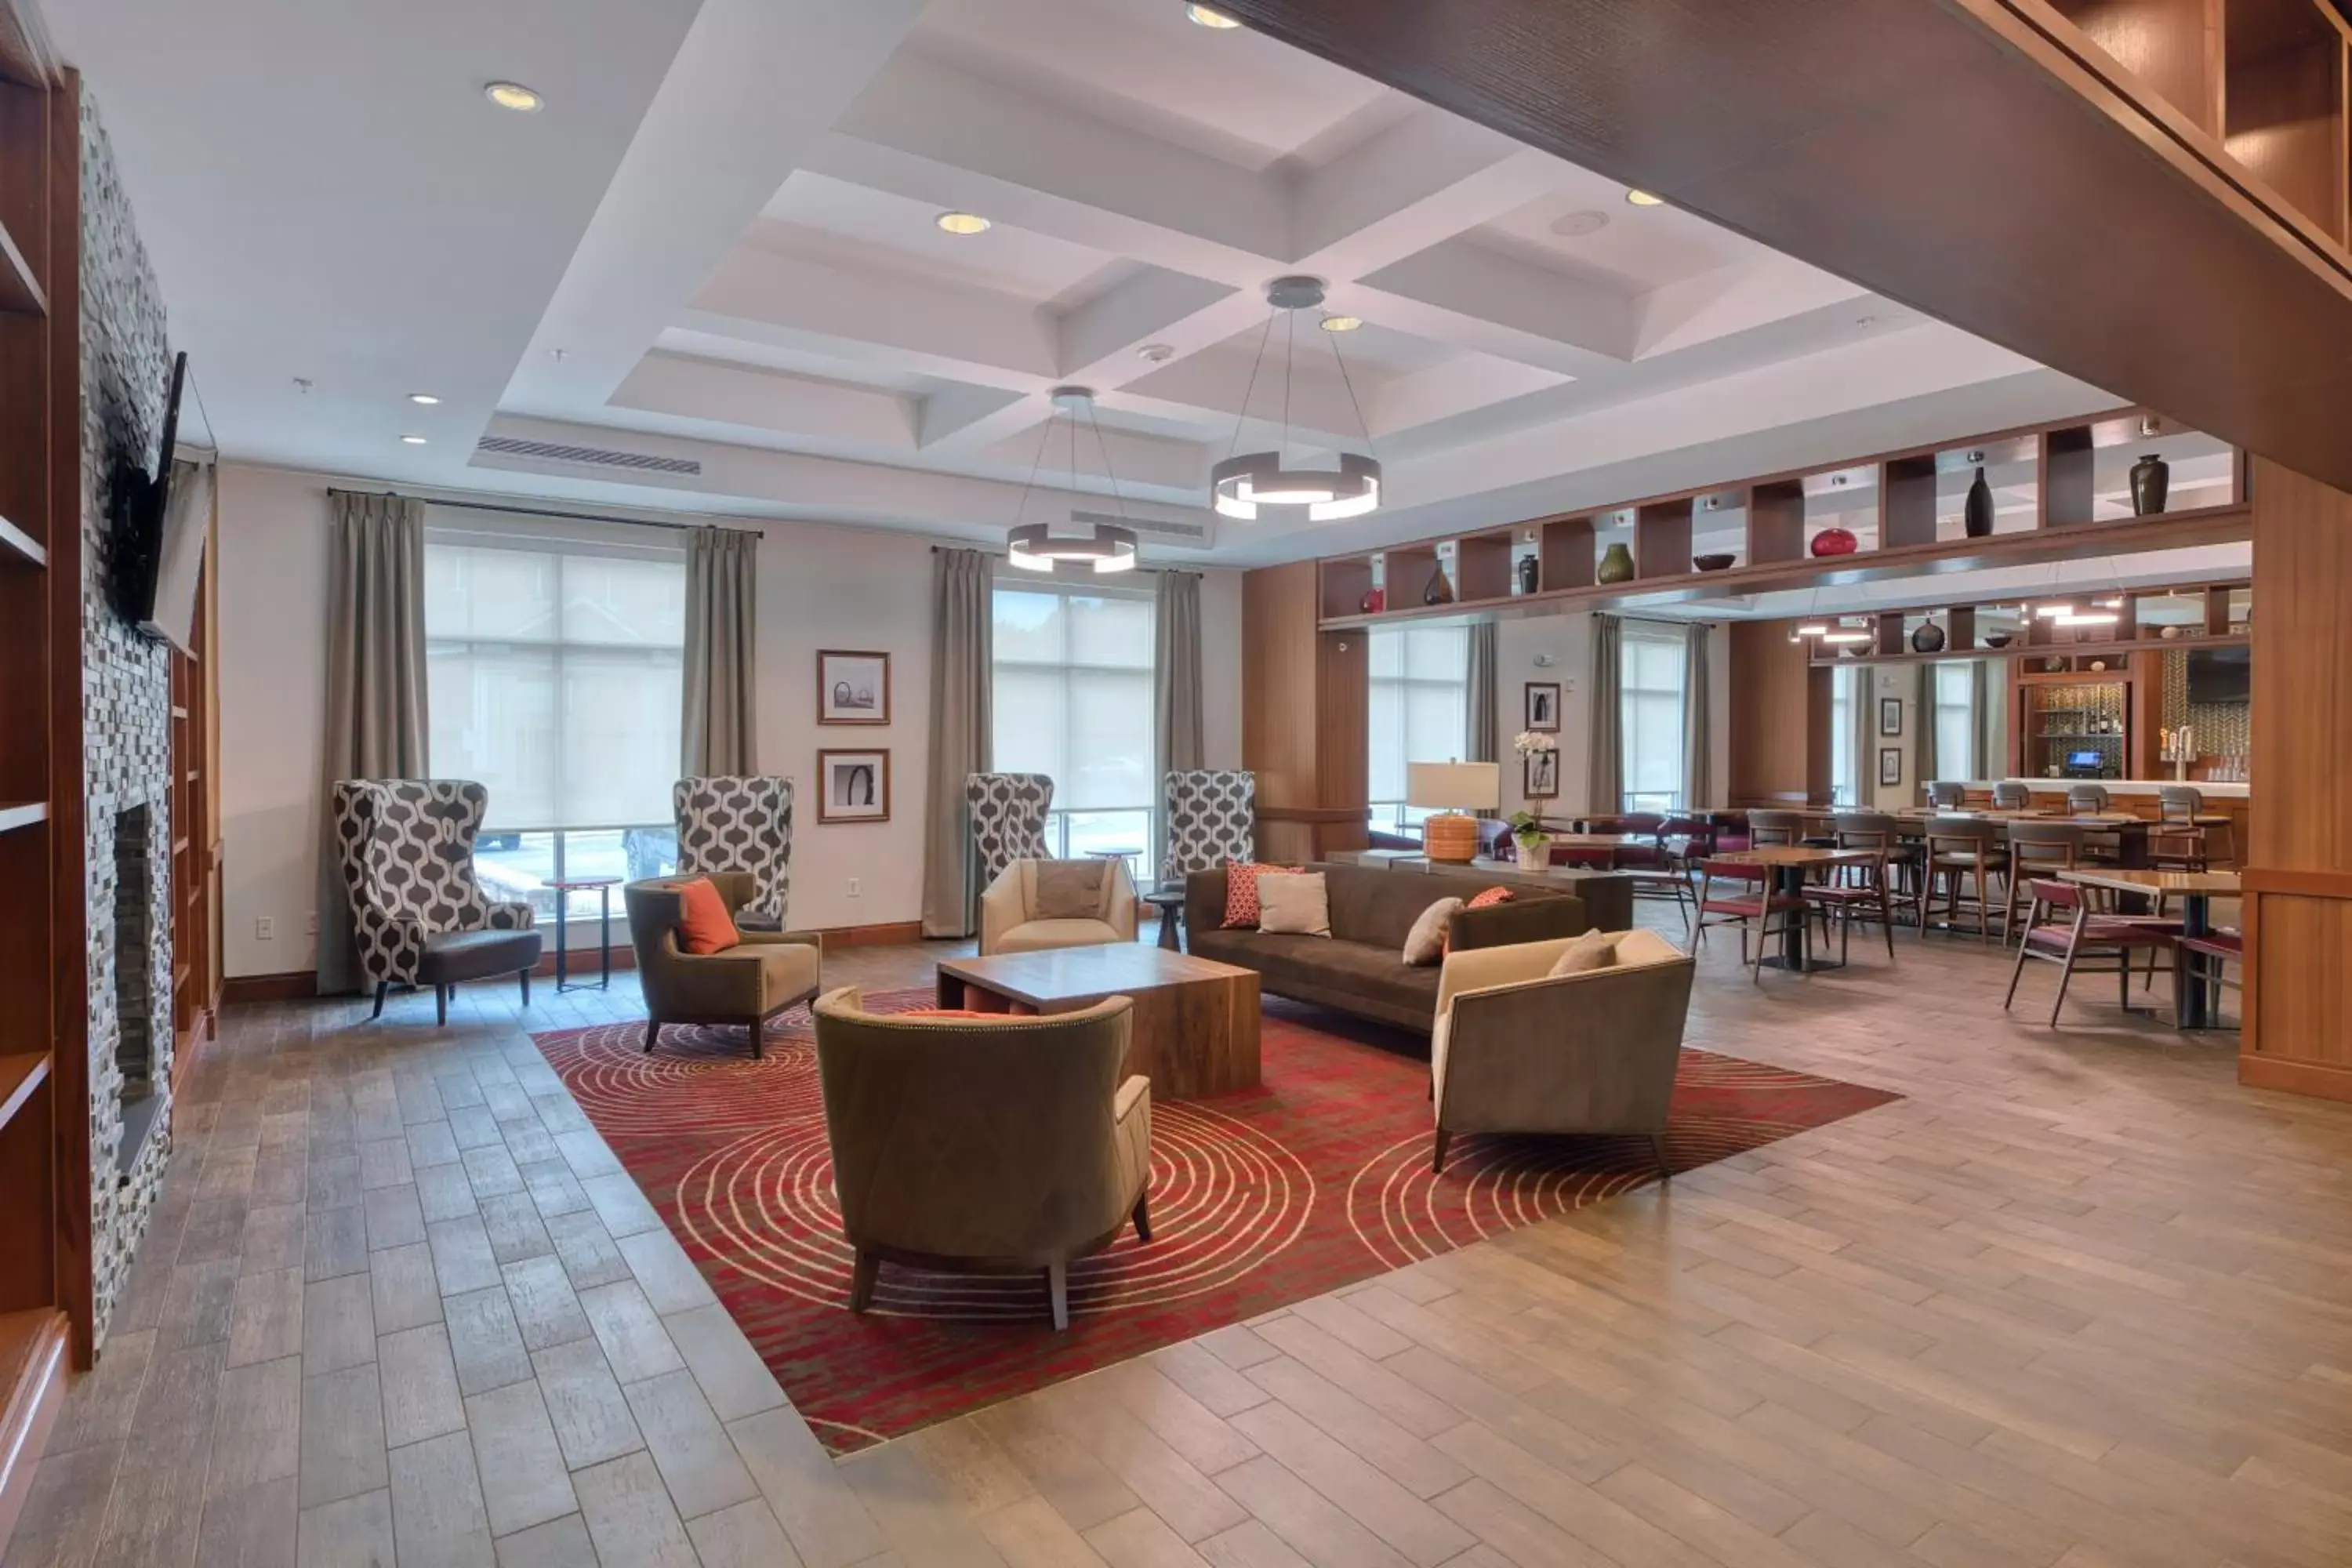 Lobby or reception in DoubleTree by Hilton Raleigh-Cary